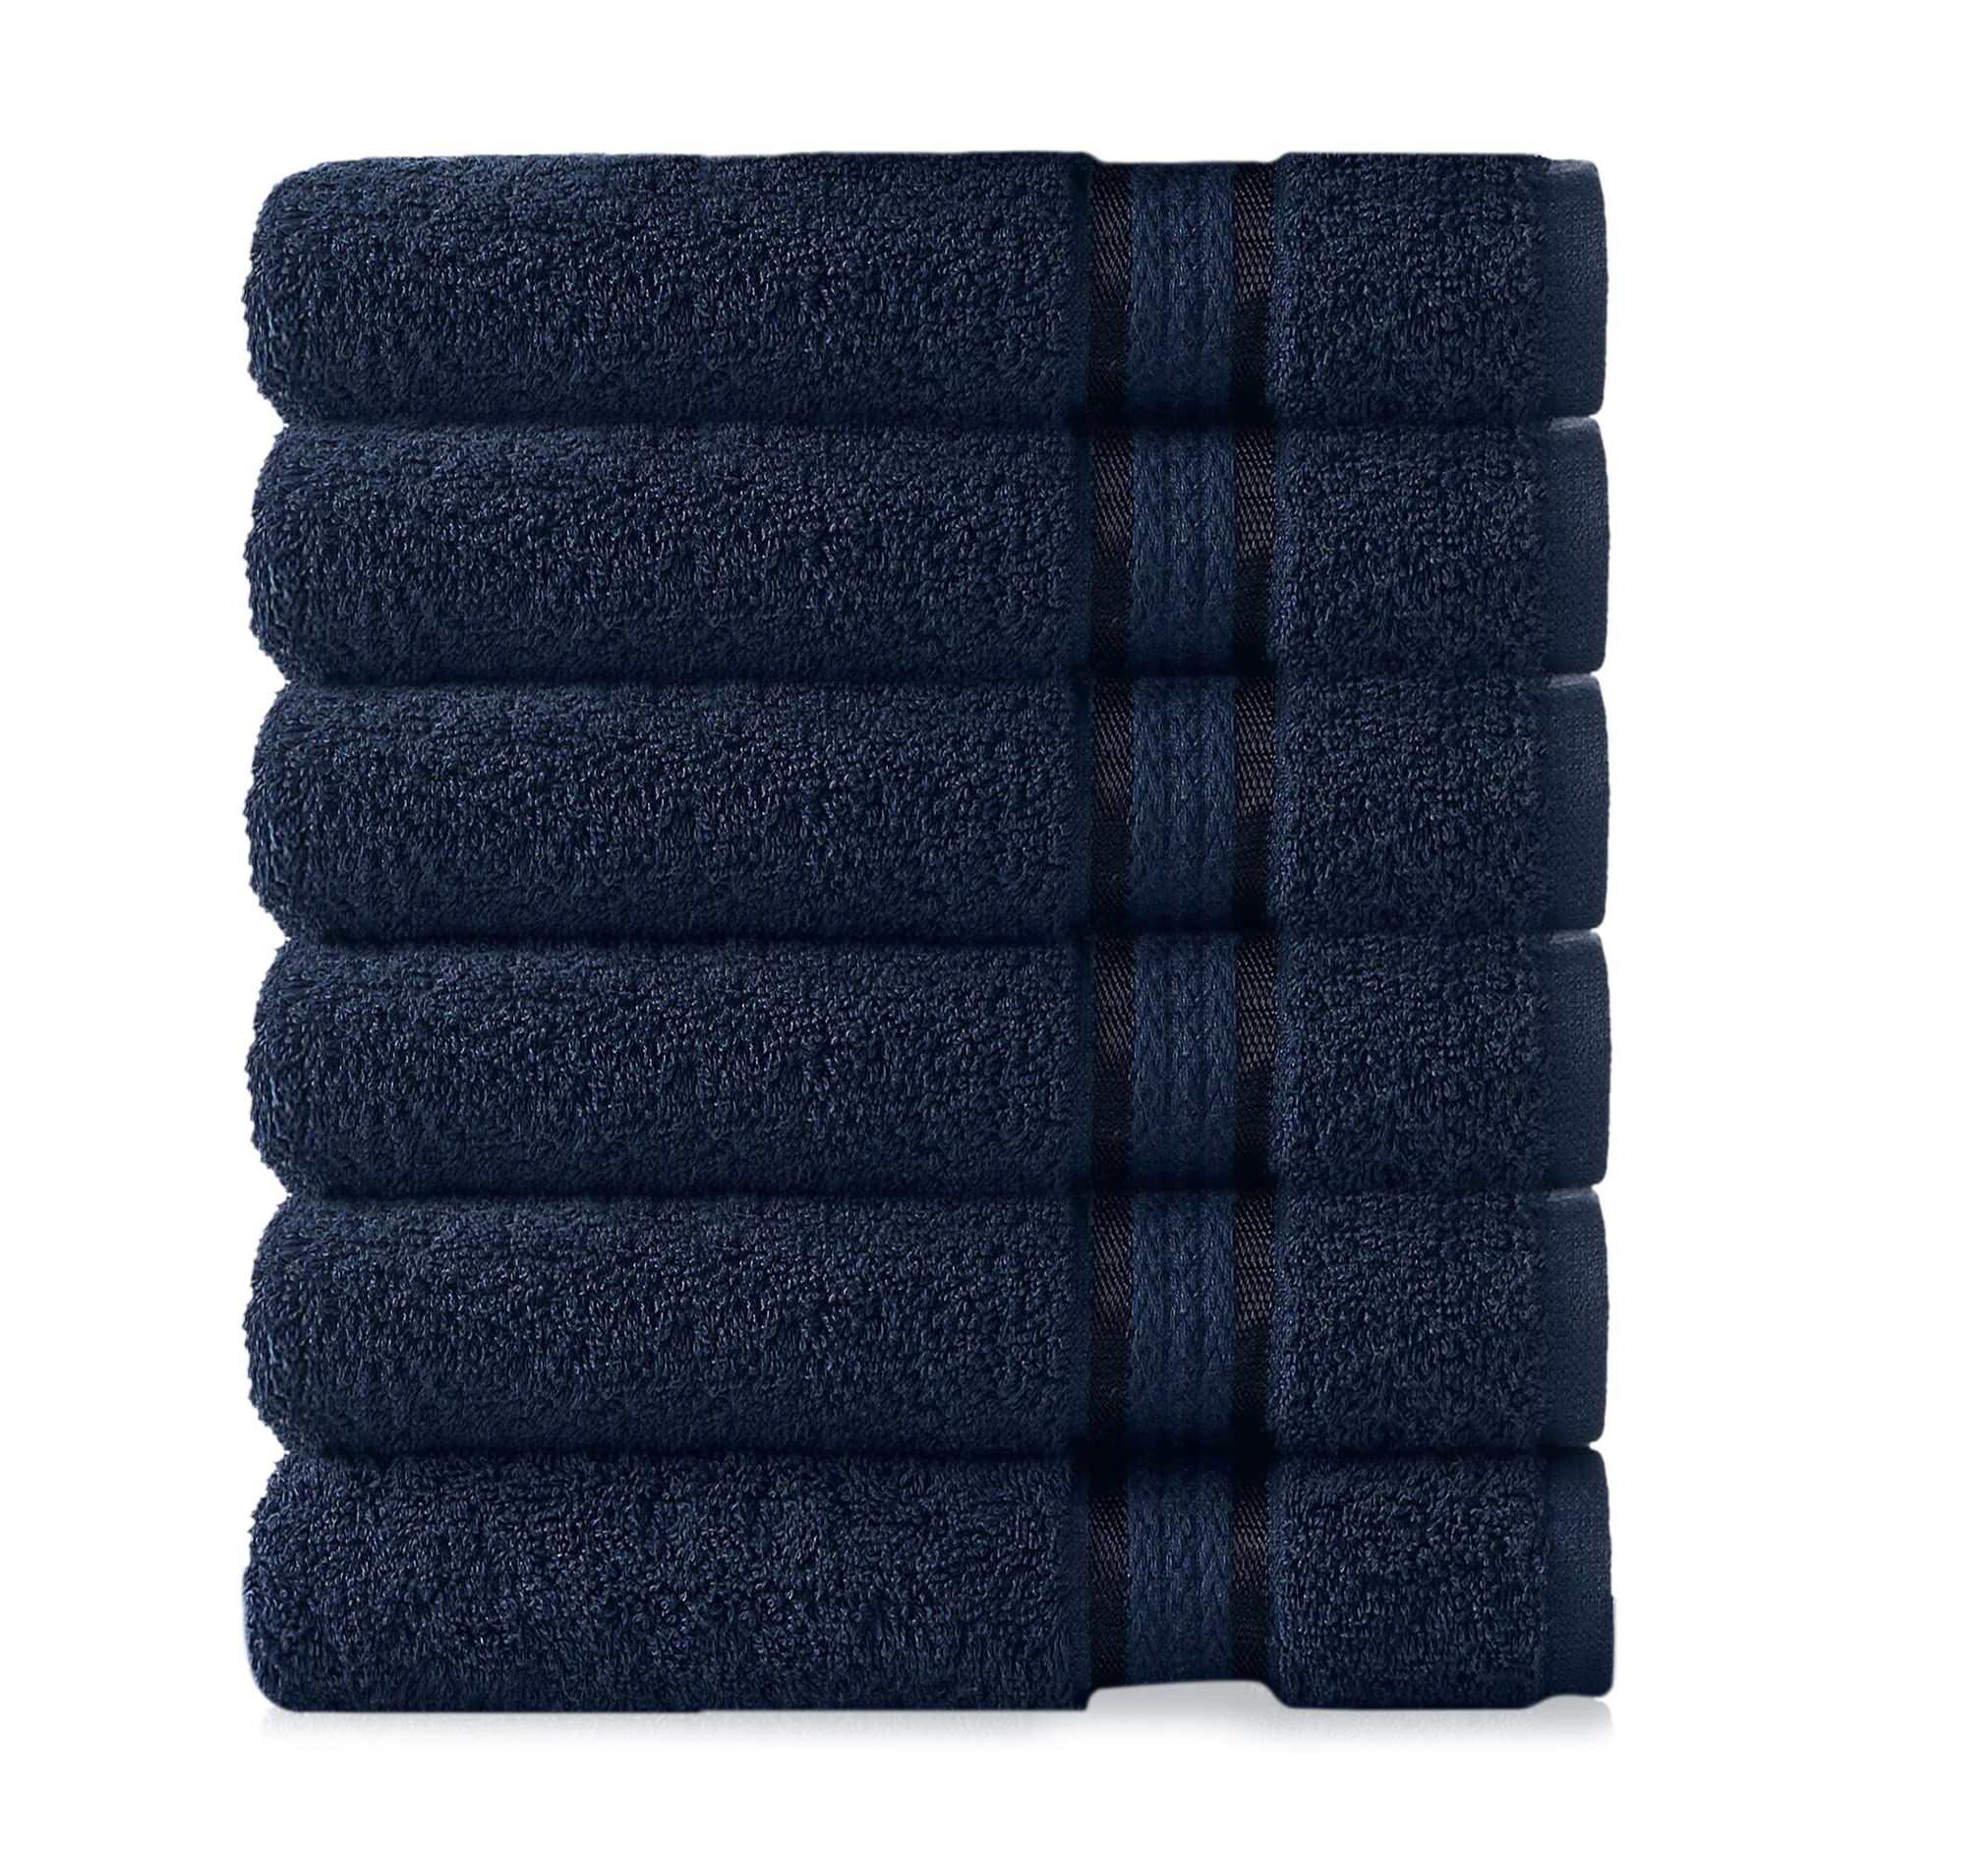 Book Cover COTTON CRAFT Ultra Soft Luxury Set of 6 Ringspun Cotton Hand Towels, 580GSM, Heavyweight, 16 inch x 26 inch, Night Sky